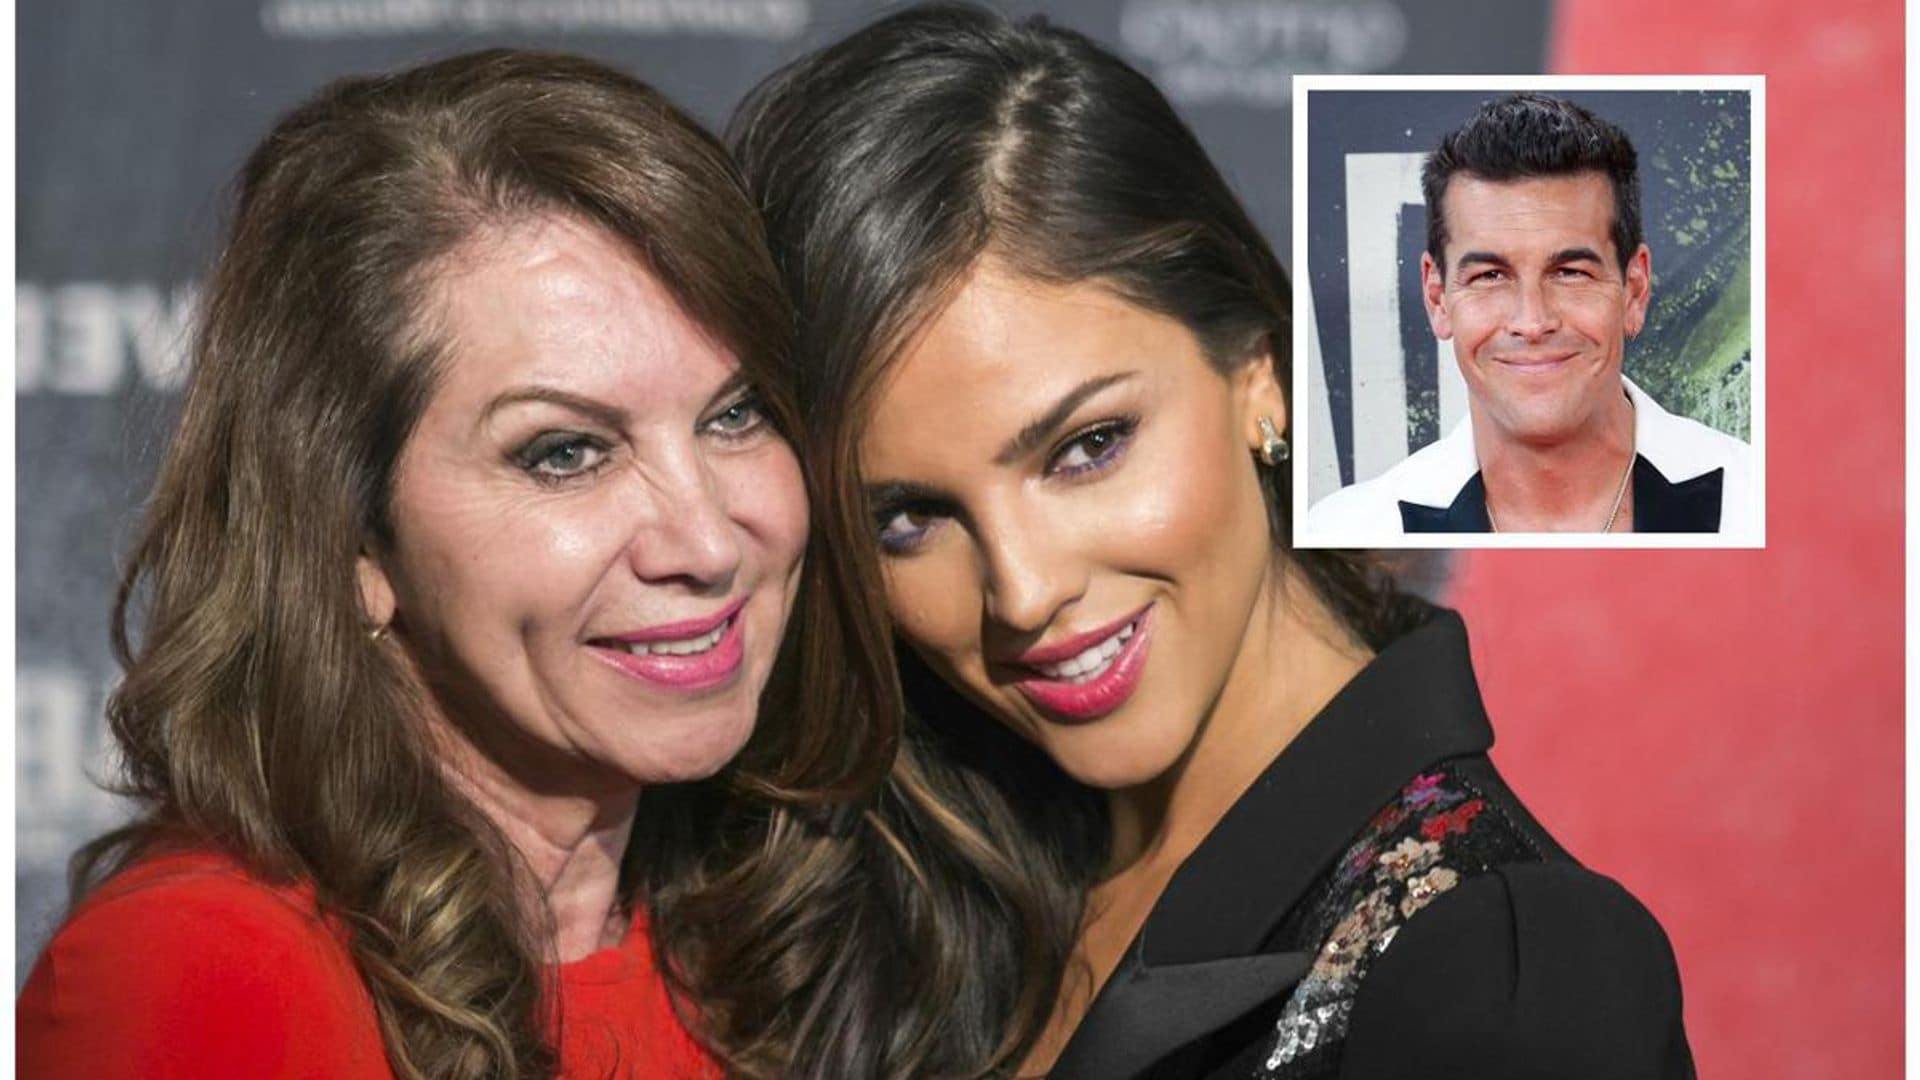 Are Eiza González and Mario Casas getting married? The actress’s mother clarified the rumor